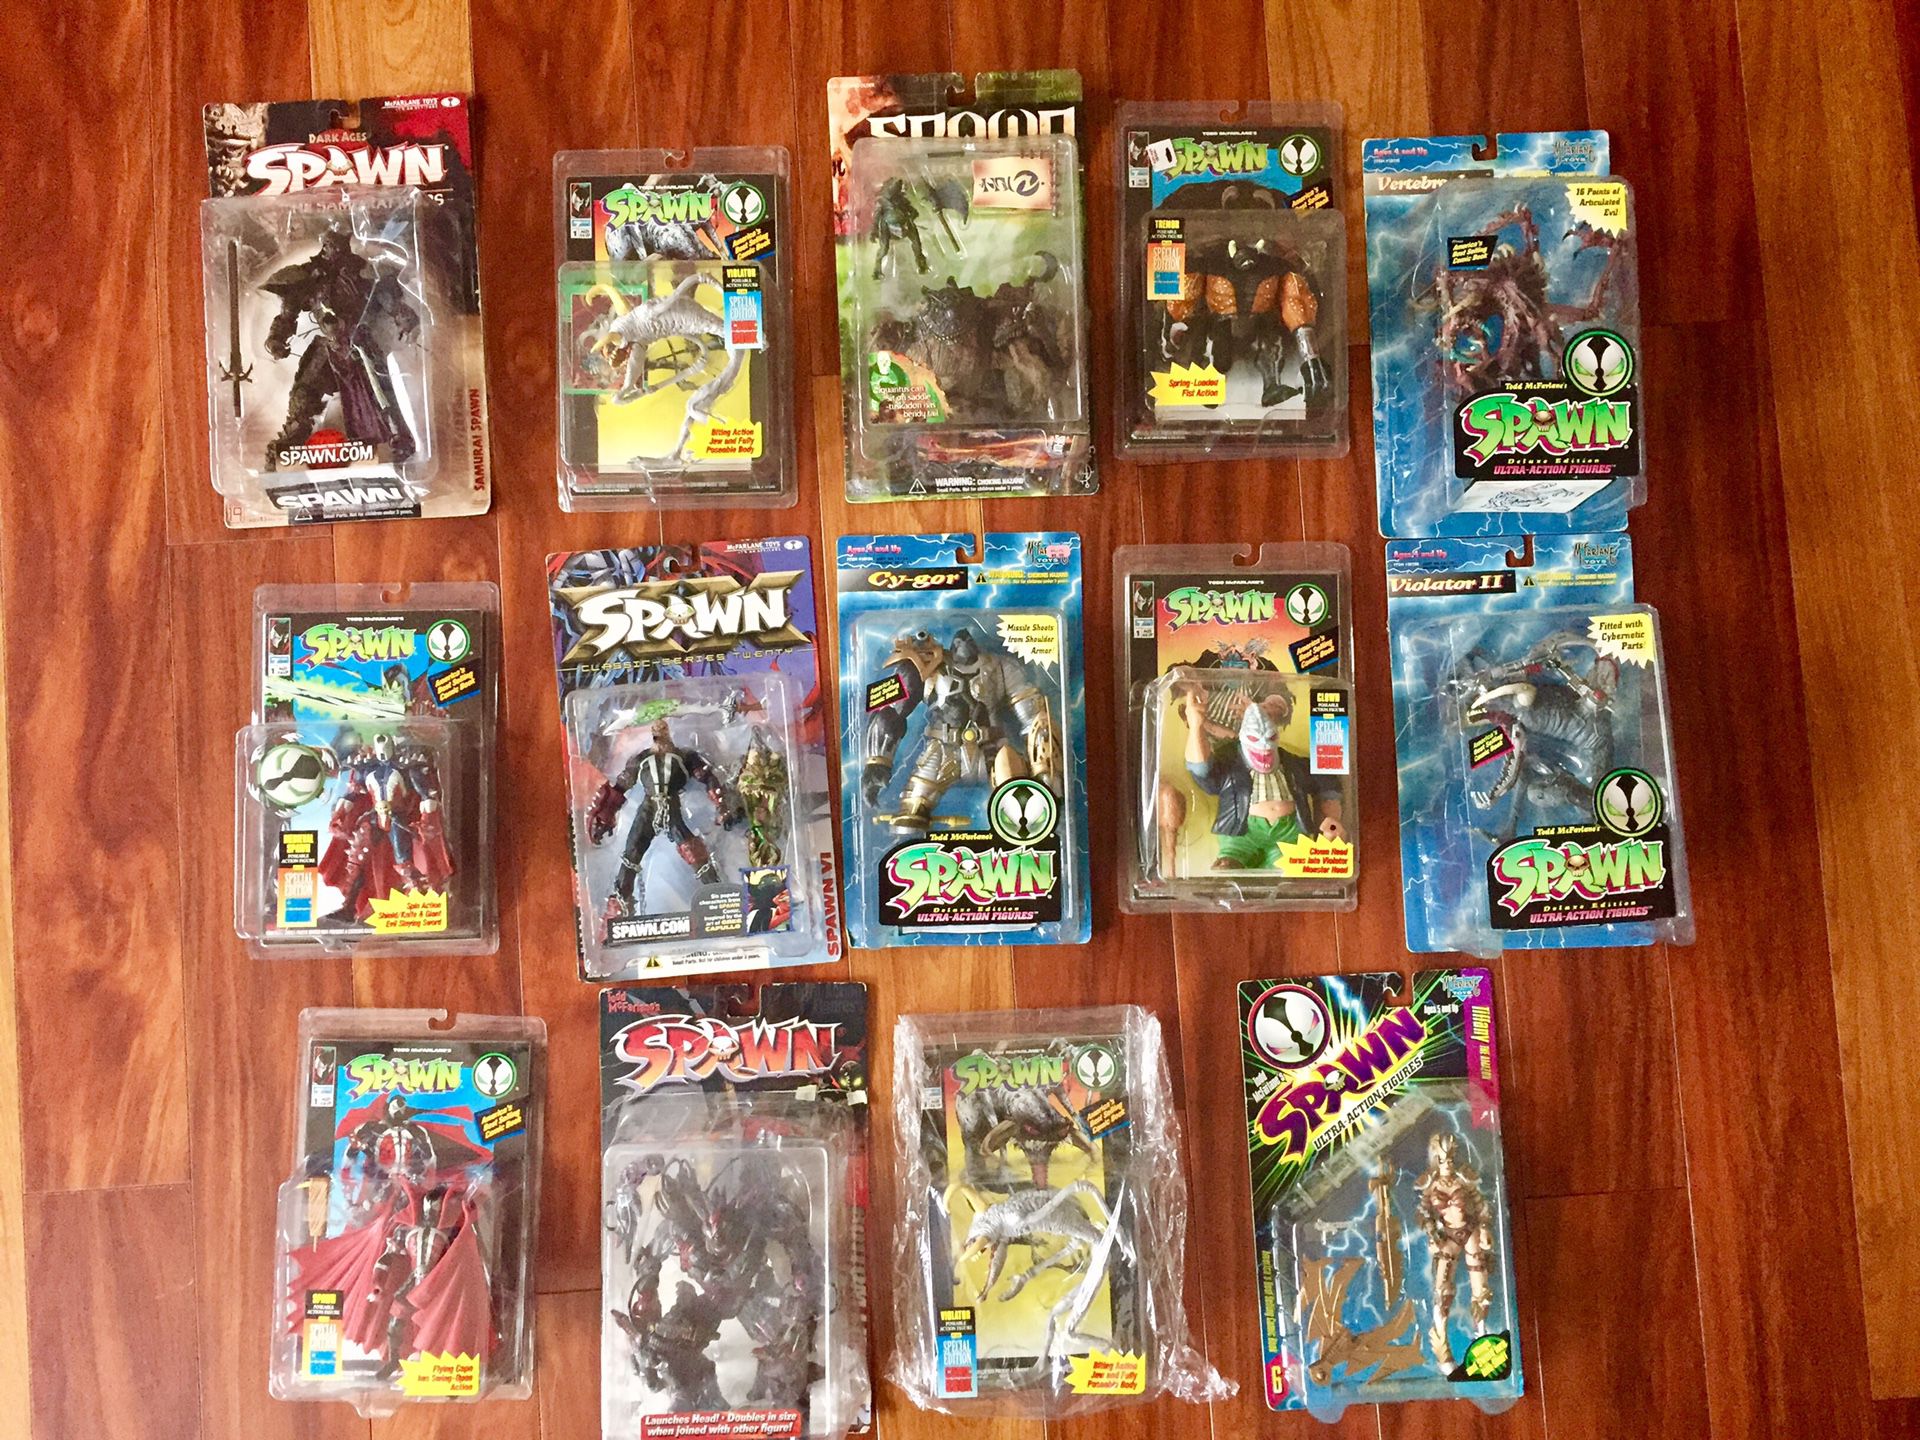 14 SPAWN ACTION FIGURES/ TOYS IN GOOD CONDITION.